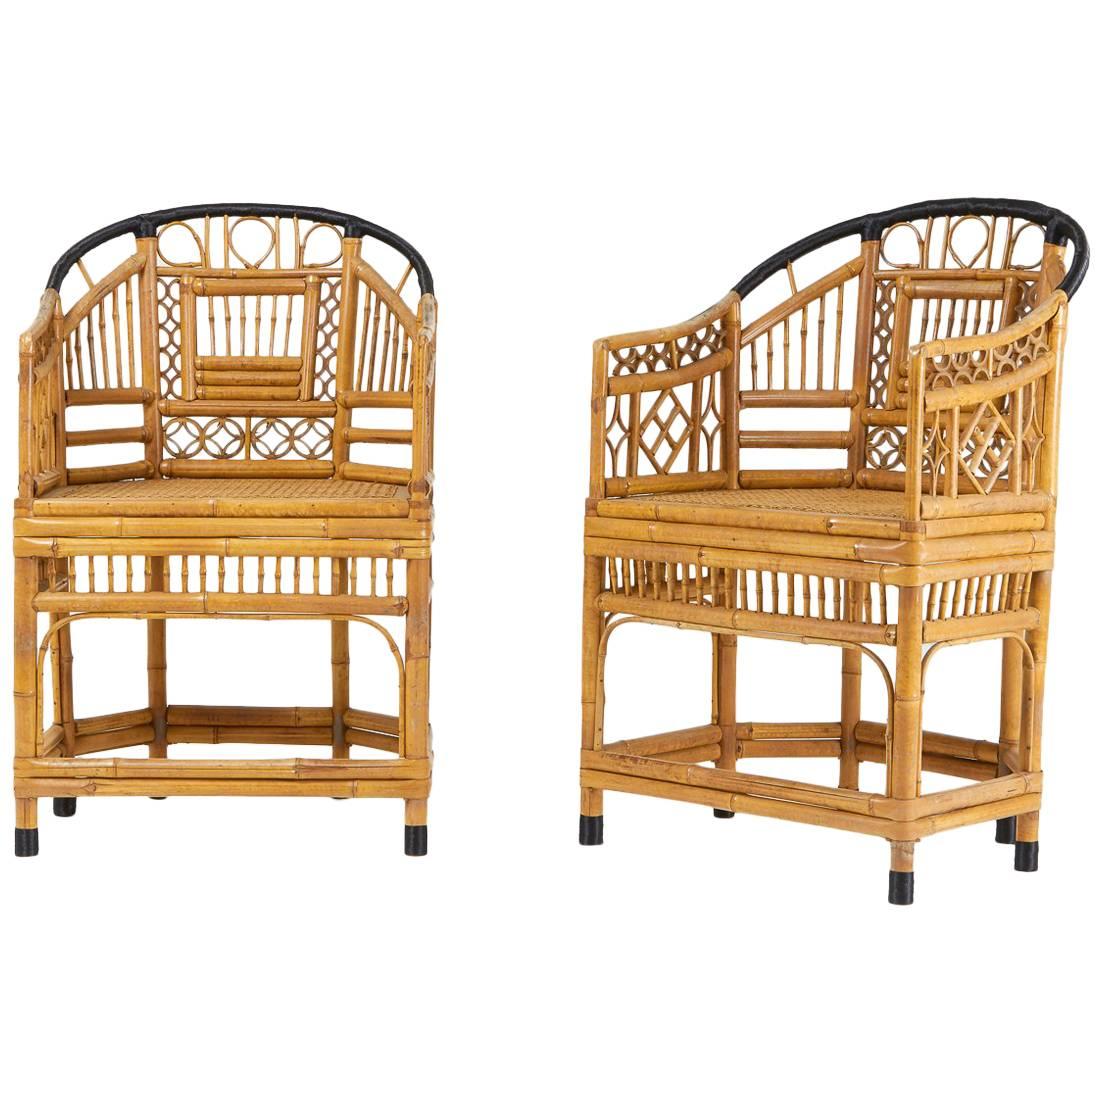 Pair of Unusual French Bamboo Chairs